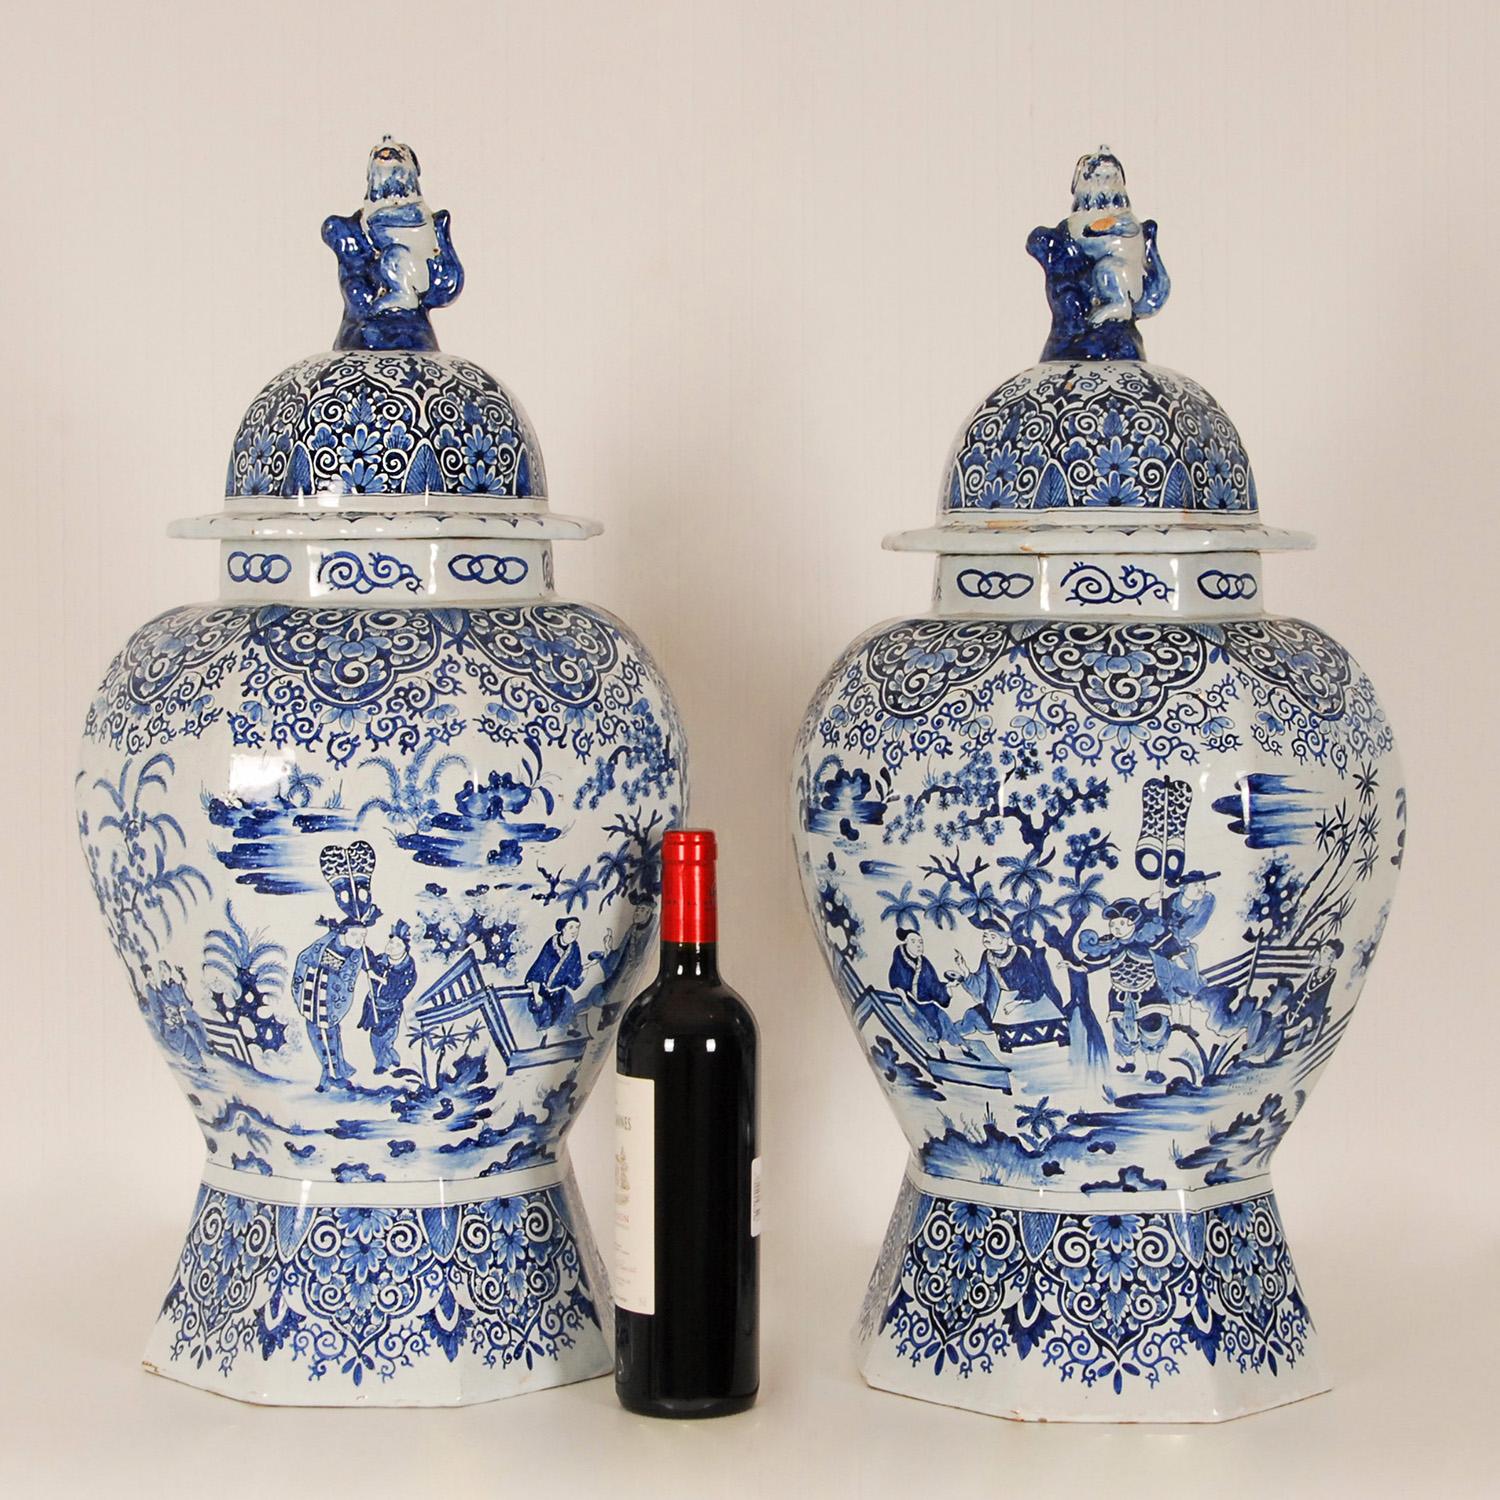 Dutch Delft Vases 17th century Style Earthenware Blue White Tall Baluster Vases a pair